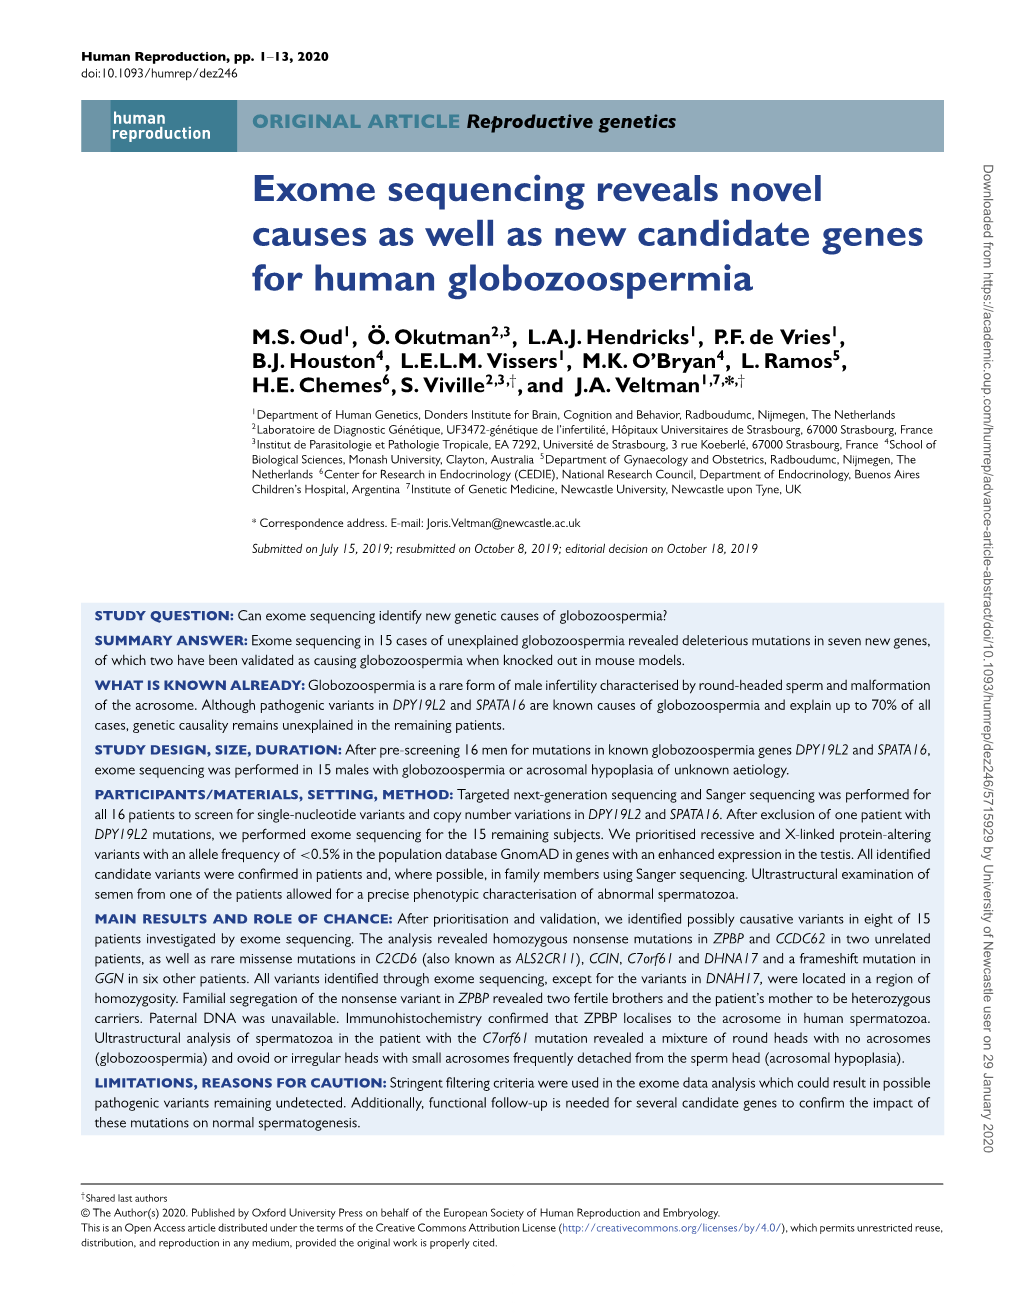 Exome Sequencing Reveals Novel Causes As Well As New Candidate Genes for Human Globozoospermia